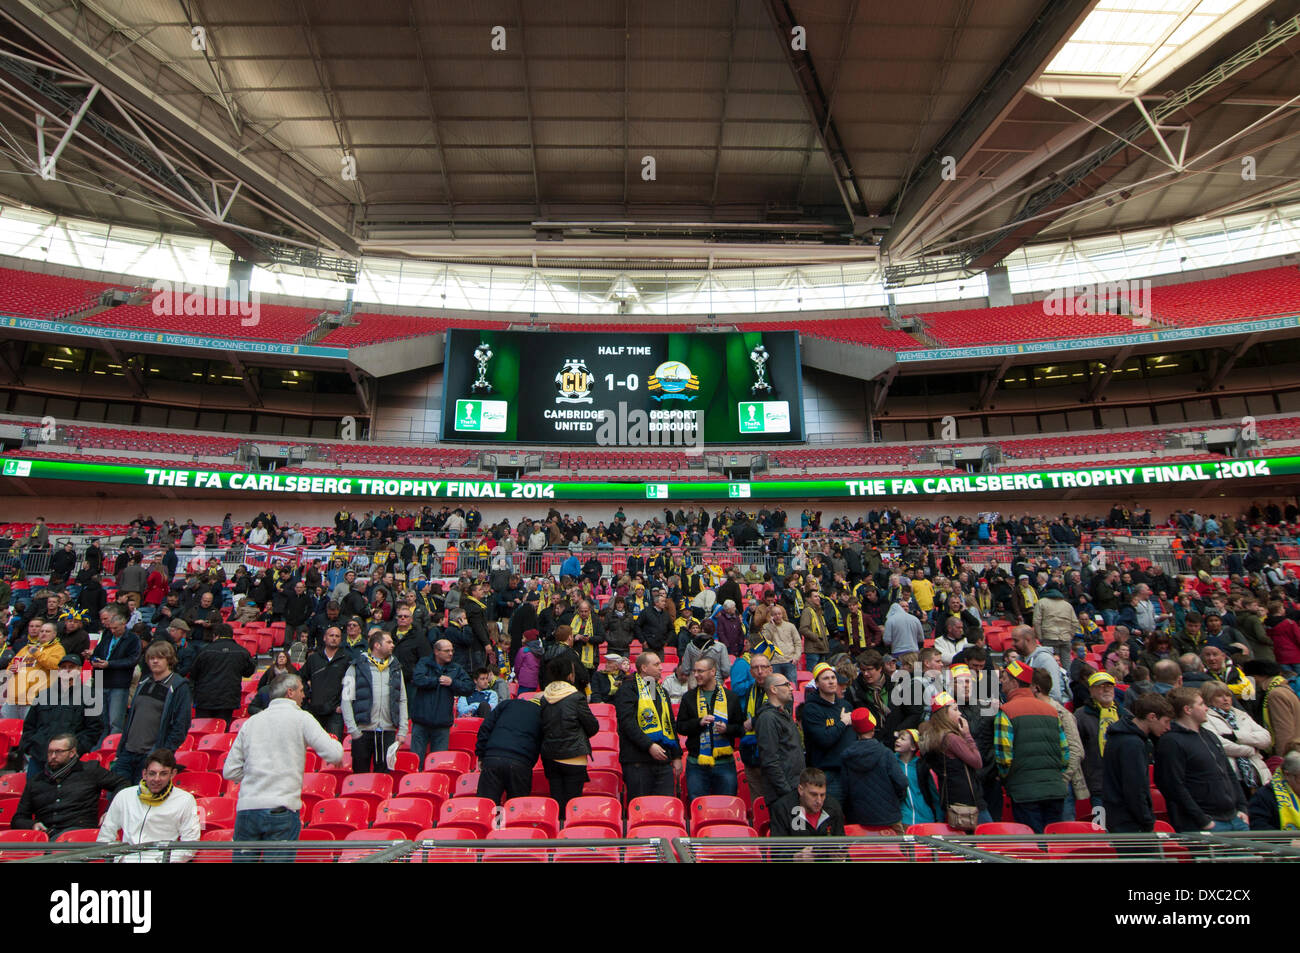 Wembley, London, UK. 23rd March 2014. Gosport fans under the scoreboard at Wembley Stadium on the 23rd of March 2014 during halftime. Credit:  Flashspix/Alamy Live News Stock Photo